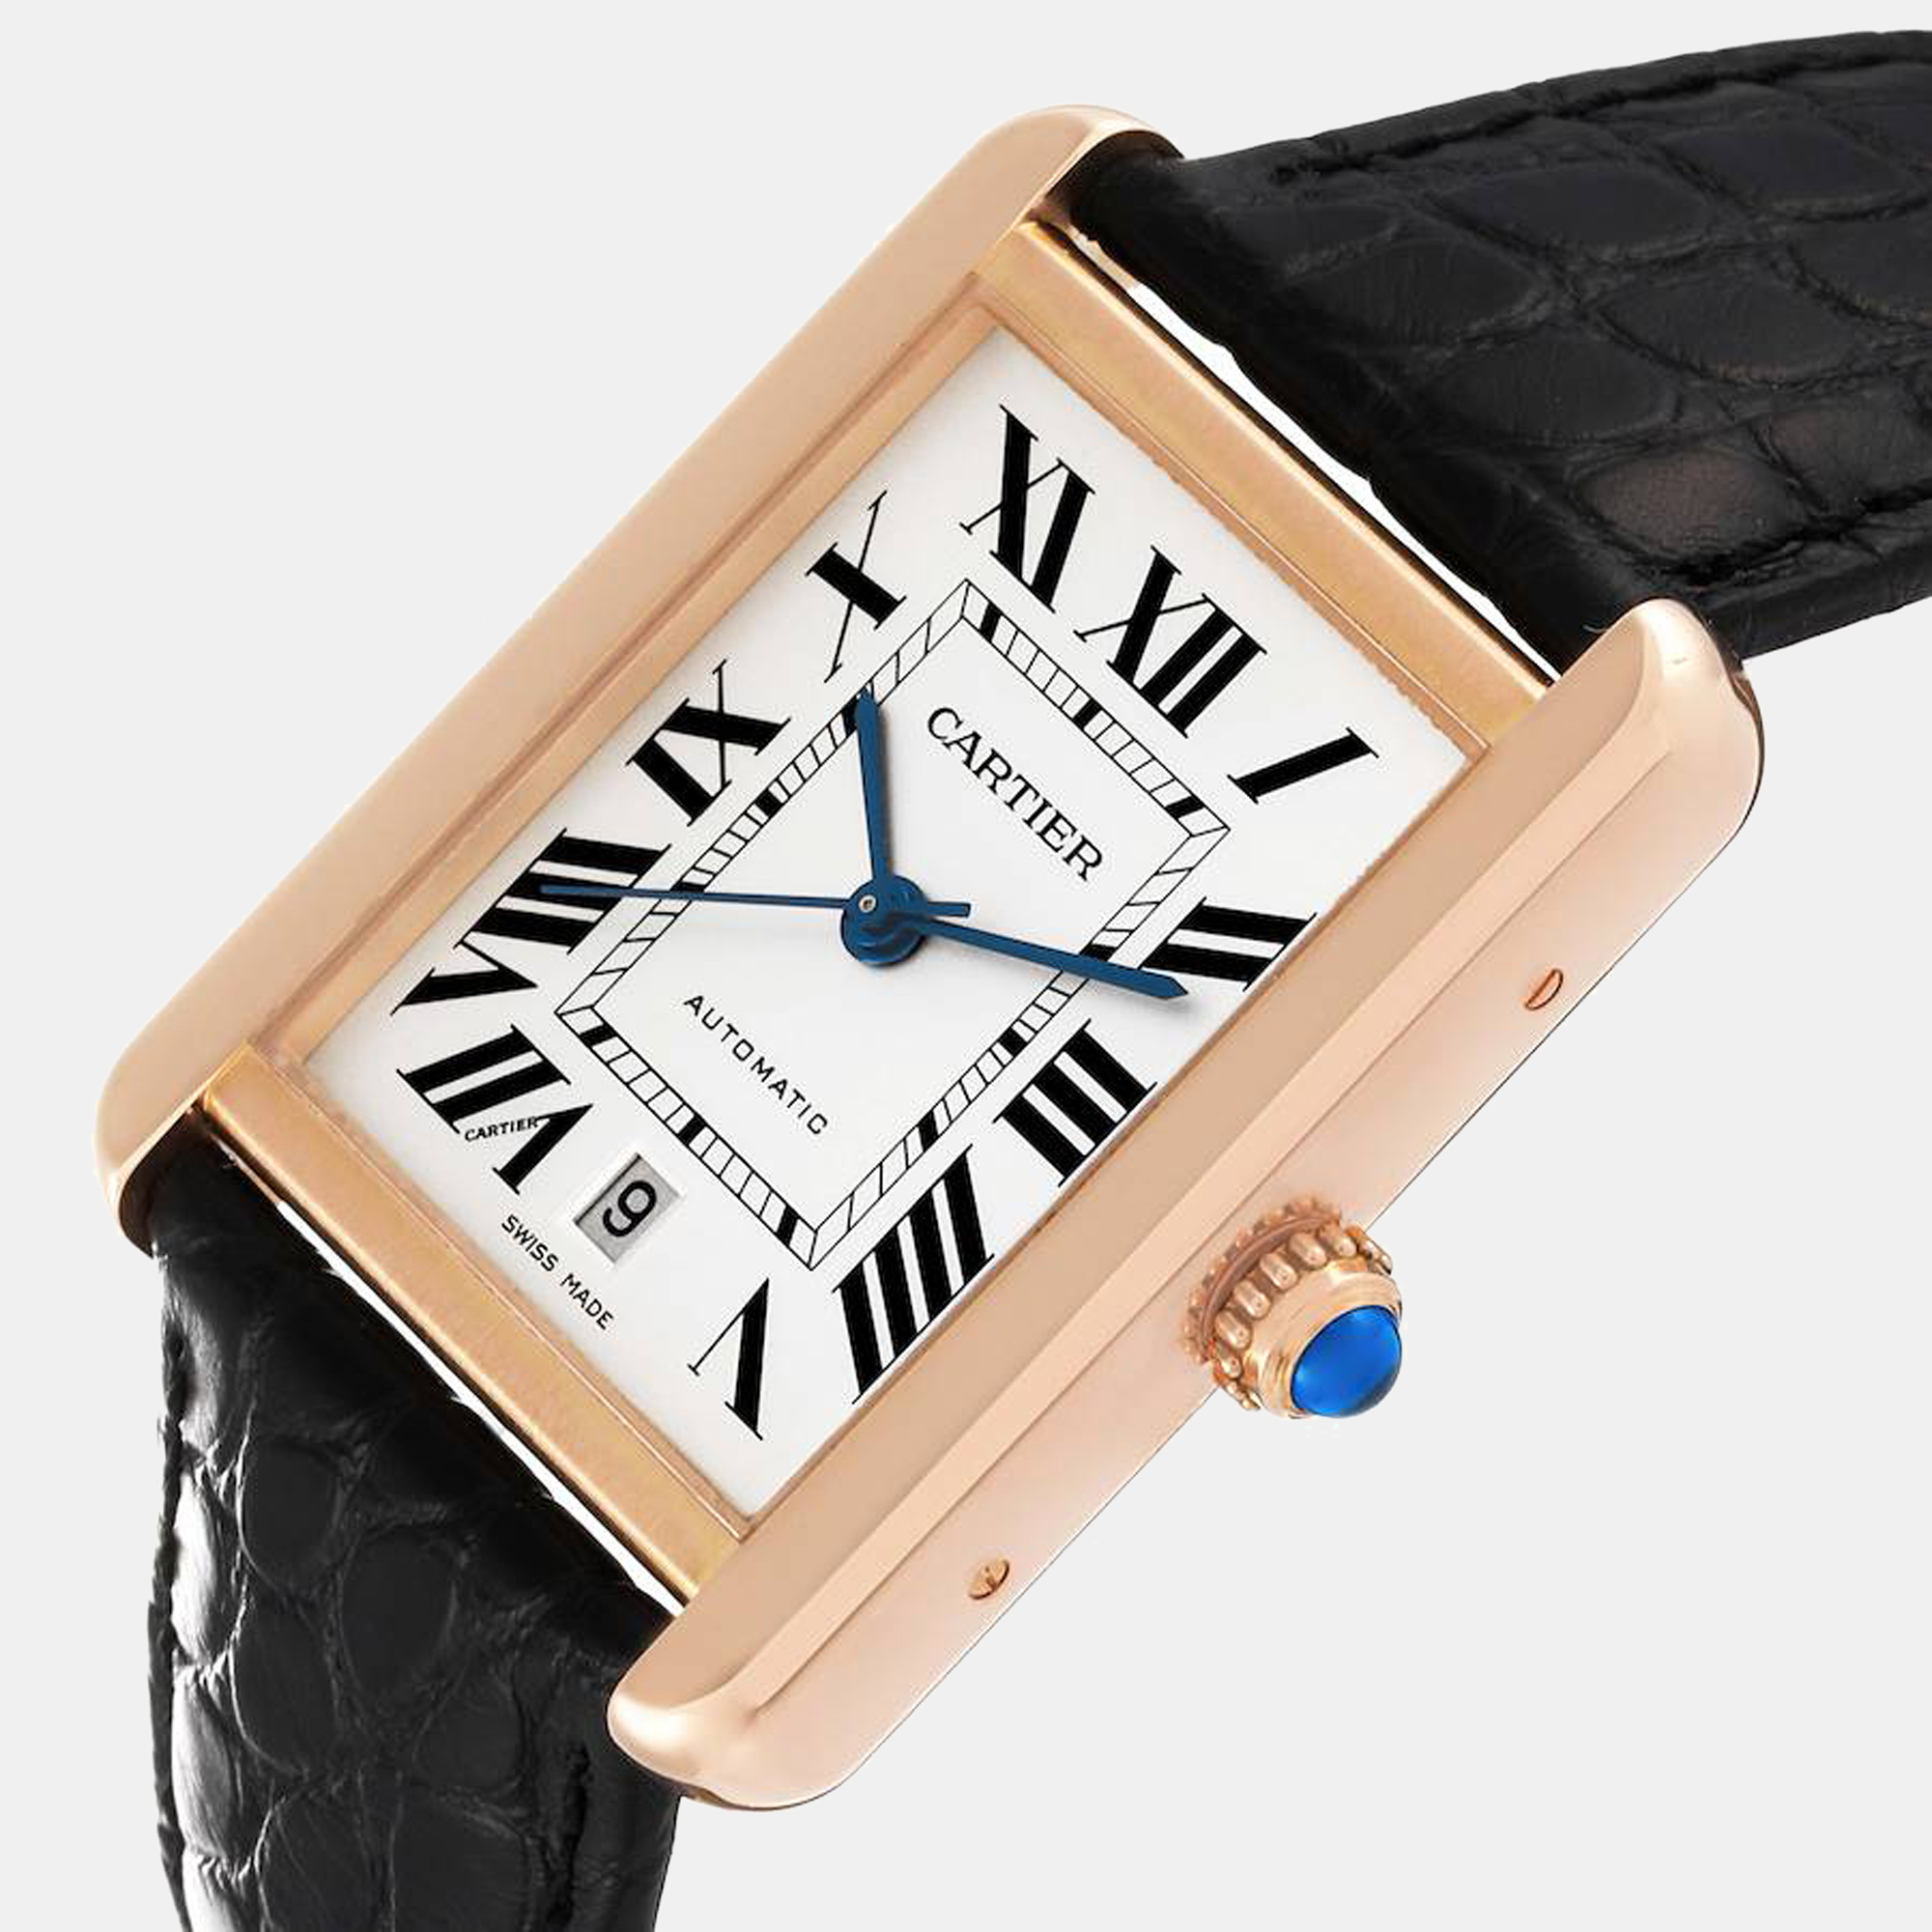 

Cartier Silver 18k Rose Gold And Stainless Steel Tank Solo W5200026 Automatic Men's Wristwatch 31 mm